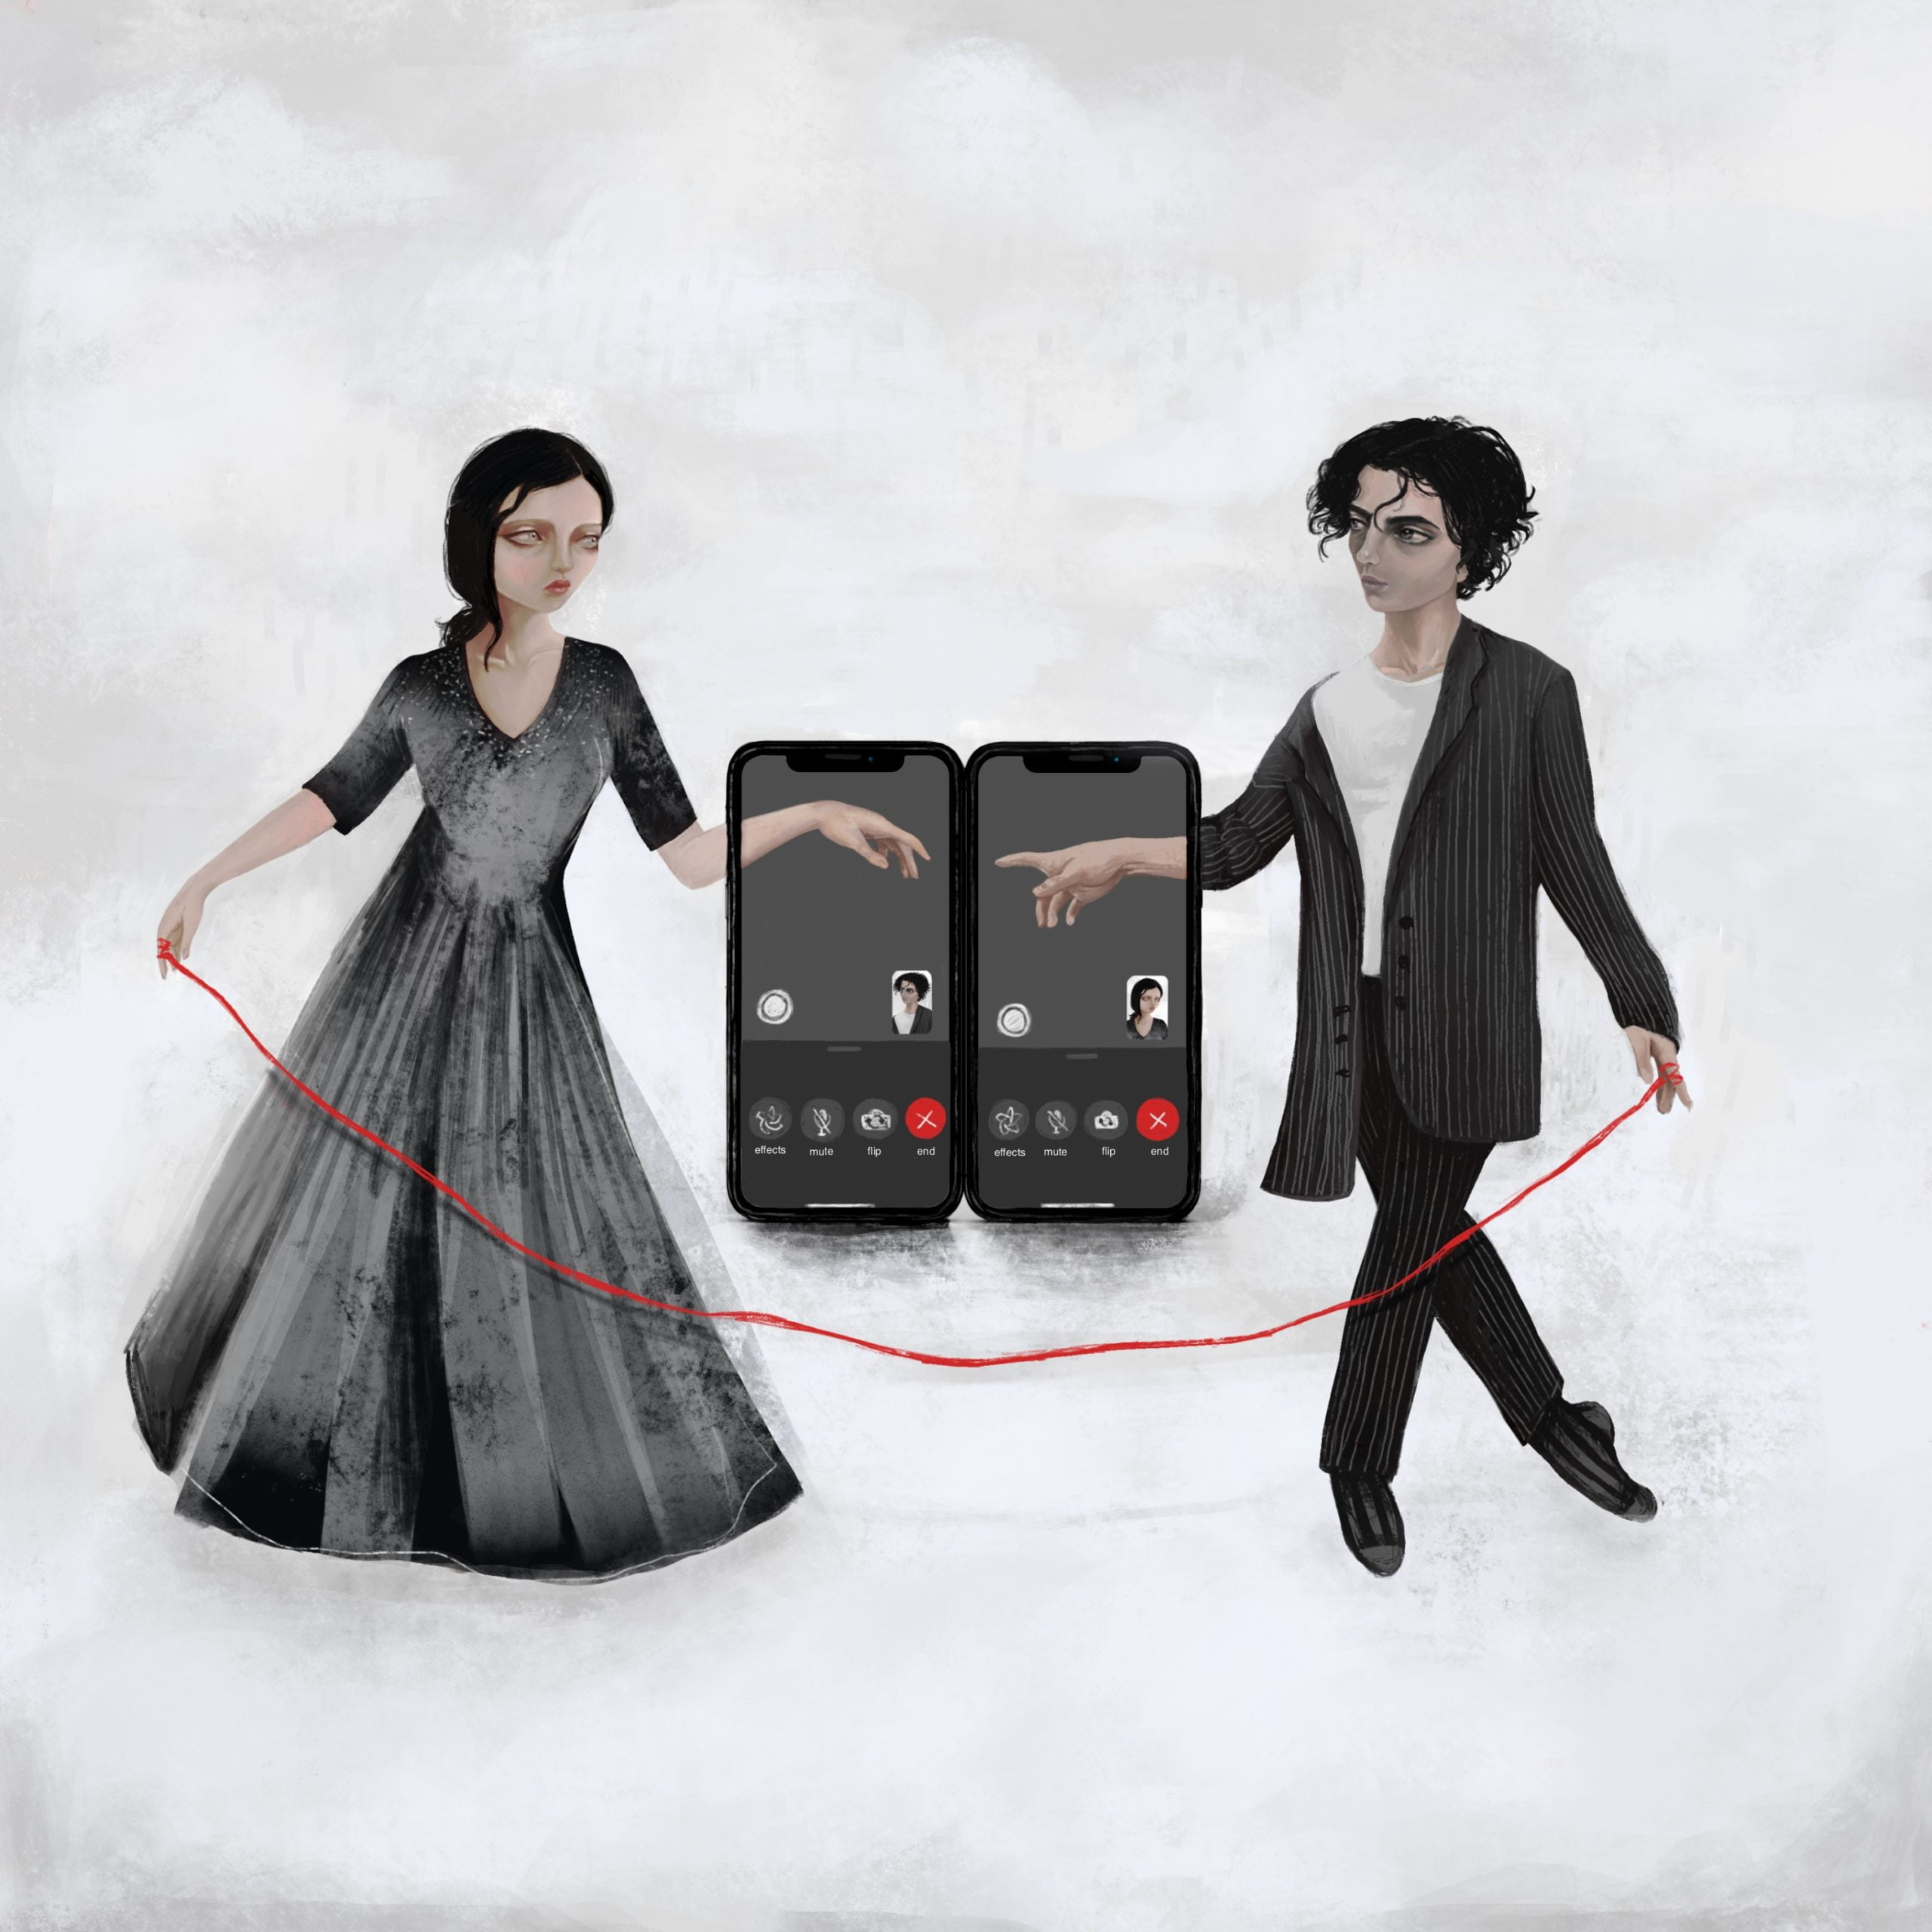 Two iPhones, screens open to Facetime, are situated side by side in the center of this image. A dreadfully beautiful macabre couple were on the distant edges. To the left, she wore a black dress draped in lace. To the right, he swam in an oversized pinstripe suit. They reached each other in a myriad of ways. First, through their gaze. Then there was the red string tied to each of their index figures. Finally, the reach of their arms through their respective iPhones, fingertips nearly meeting. A recreation of Michaelangelo’s ‘The Creation’. This is their connection.